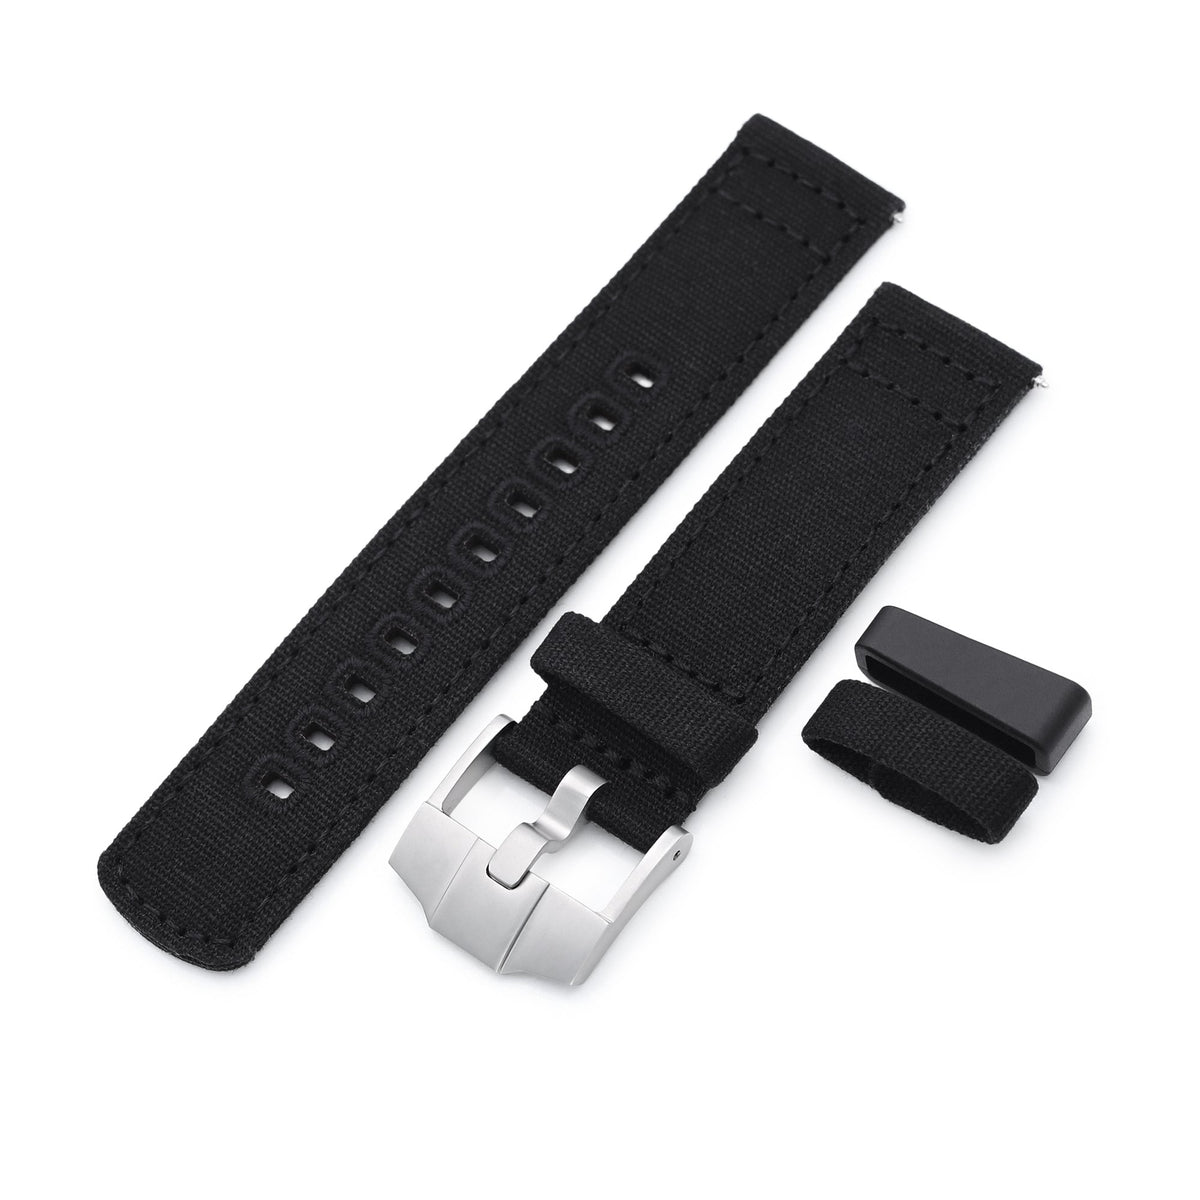 Black Quick Release Canvas Watch Strap 22mm or 20mm Strapcode Watch Bands